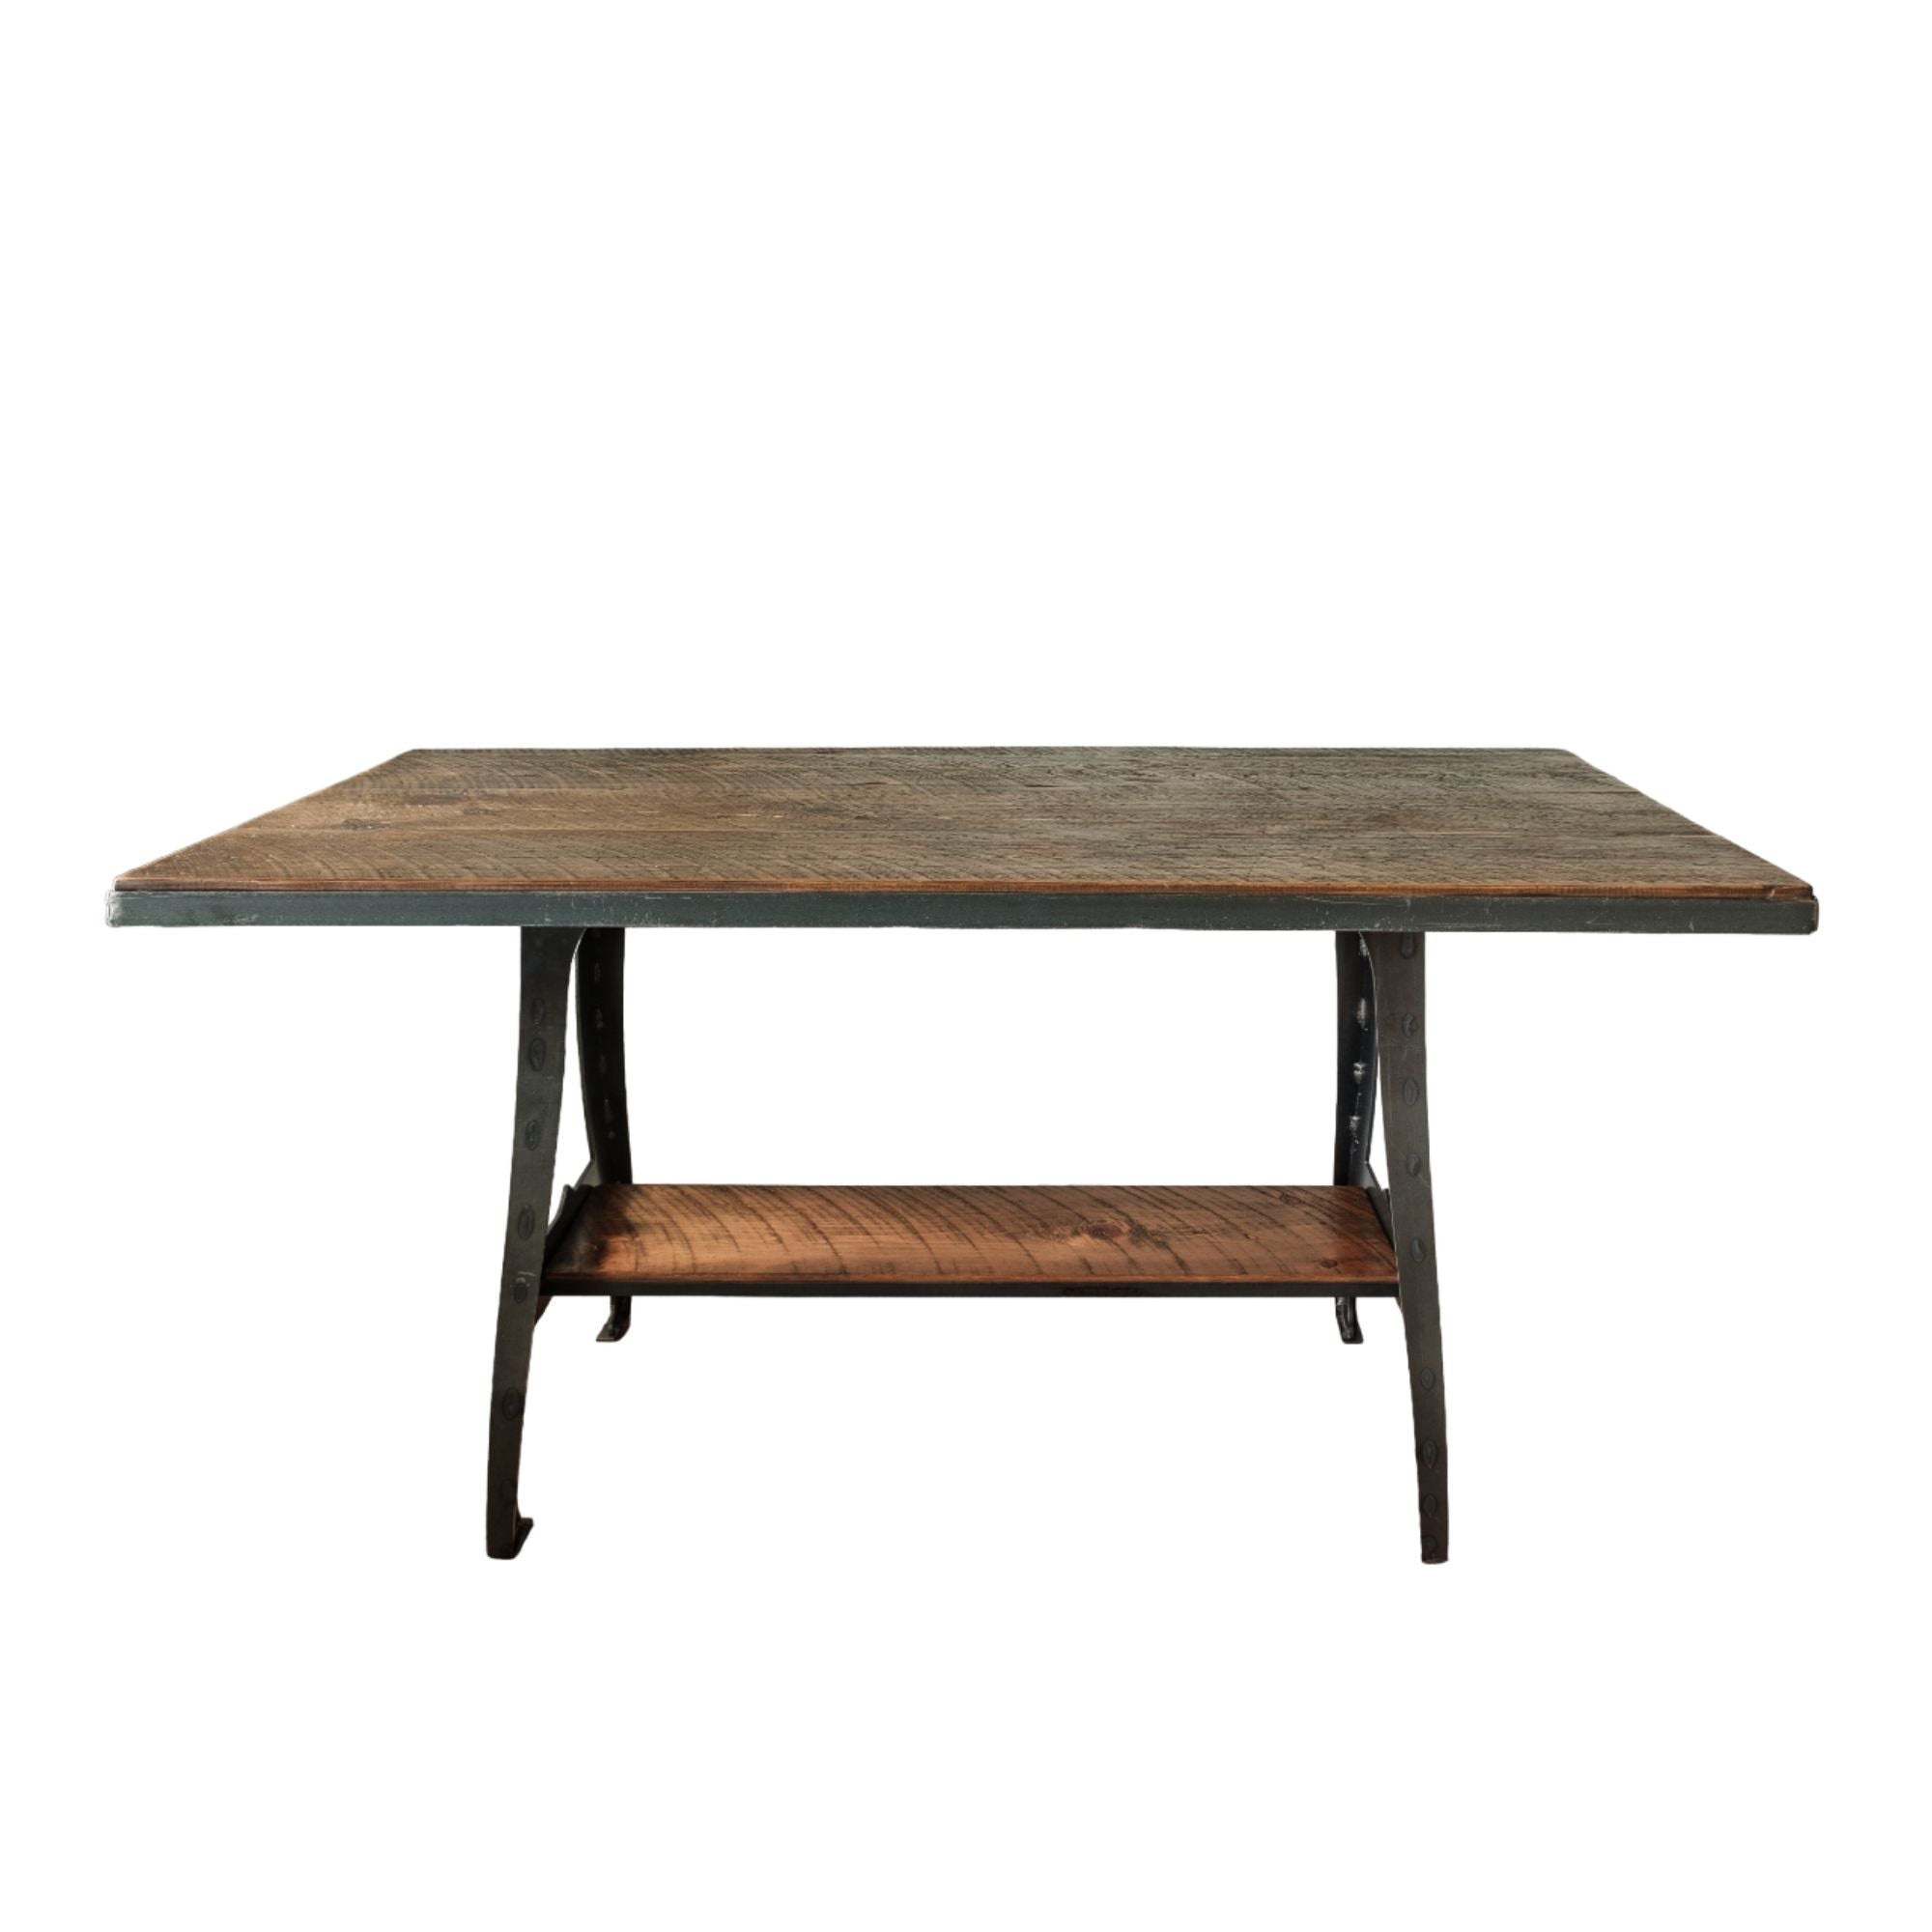 72" Brown And Black Solid Wood And Steel Sled Base Dining Table